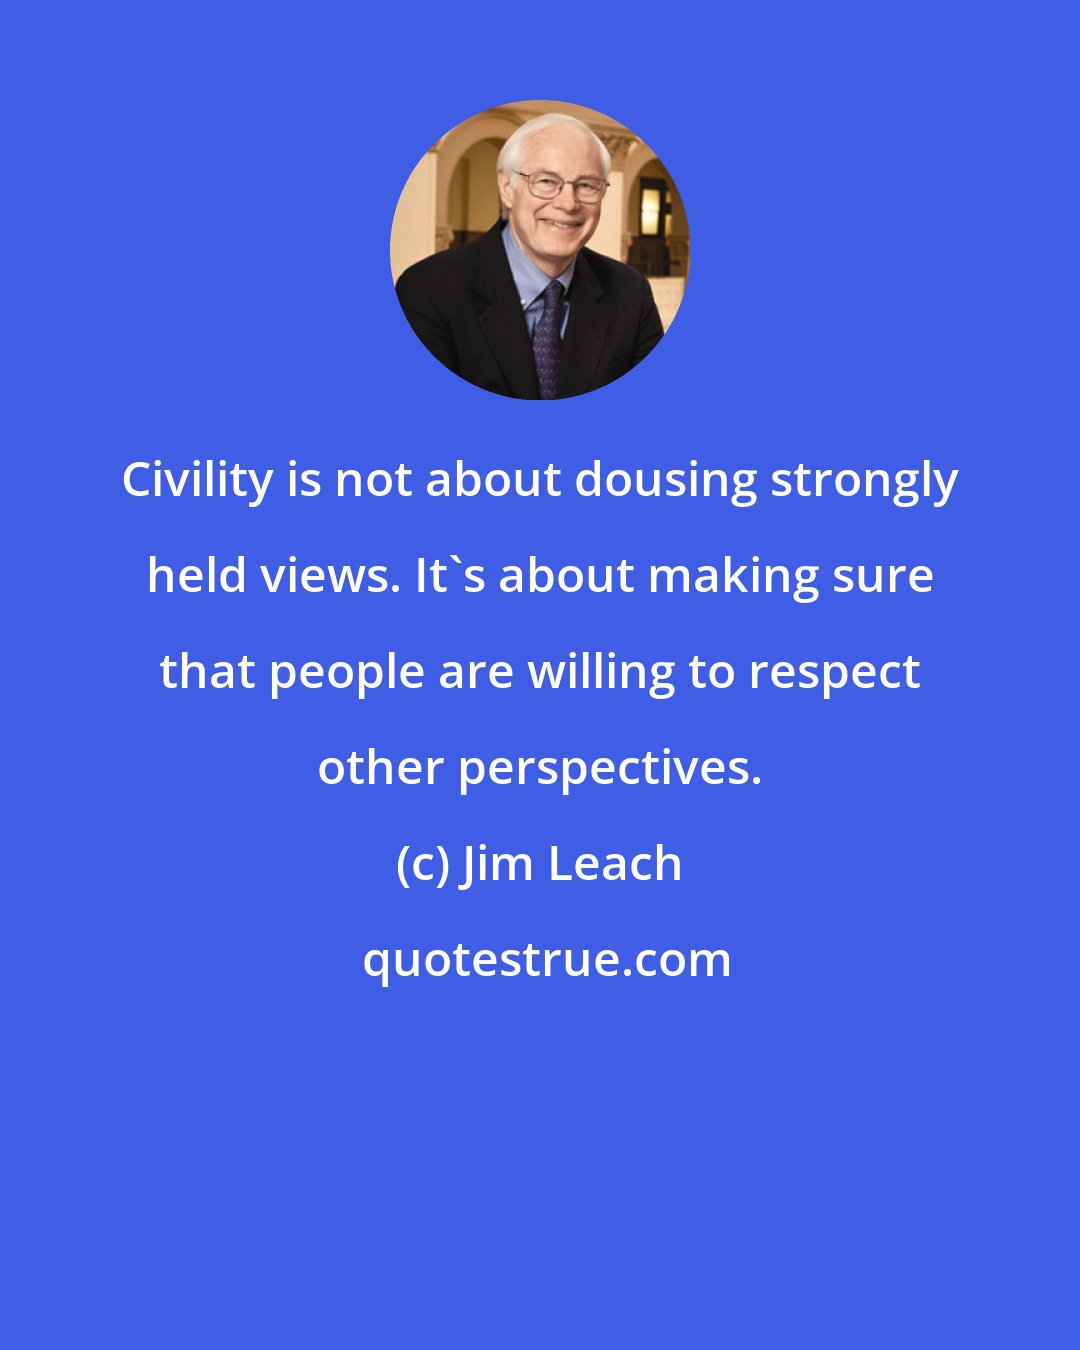 Jim Leach: Civility is not about dousing strongly held views. It's about making sure that people are willing to respect other perspectives.